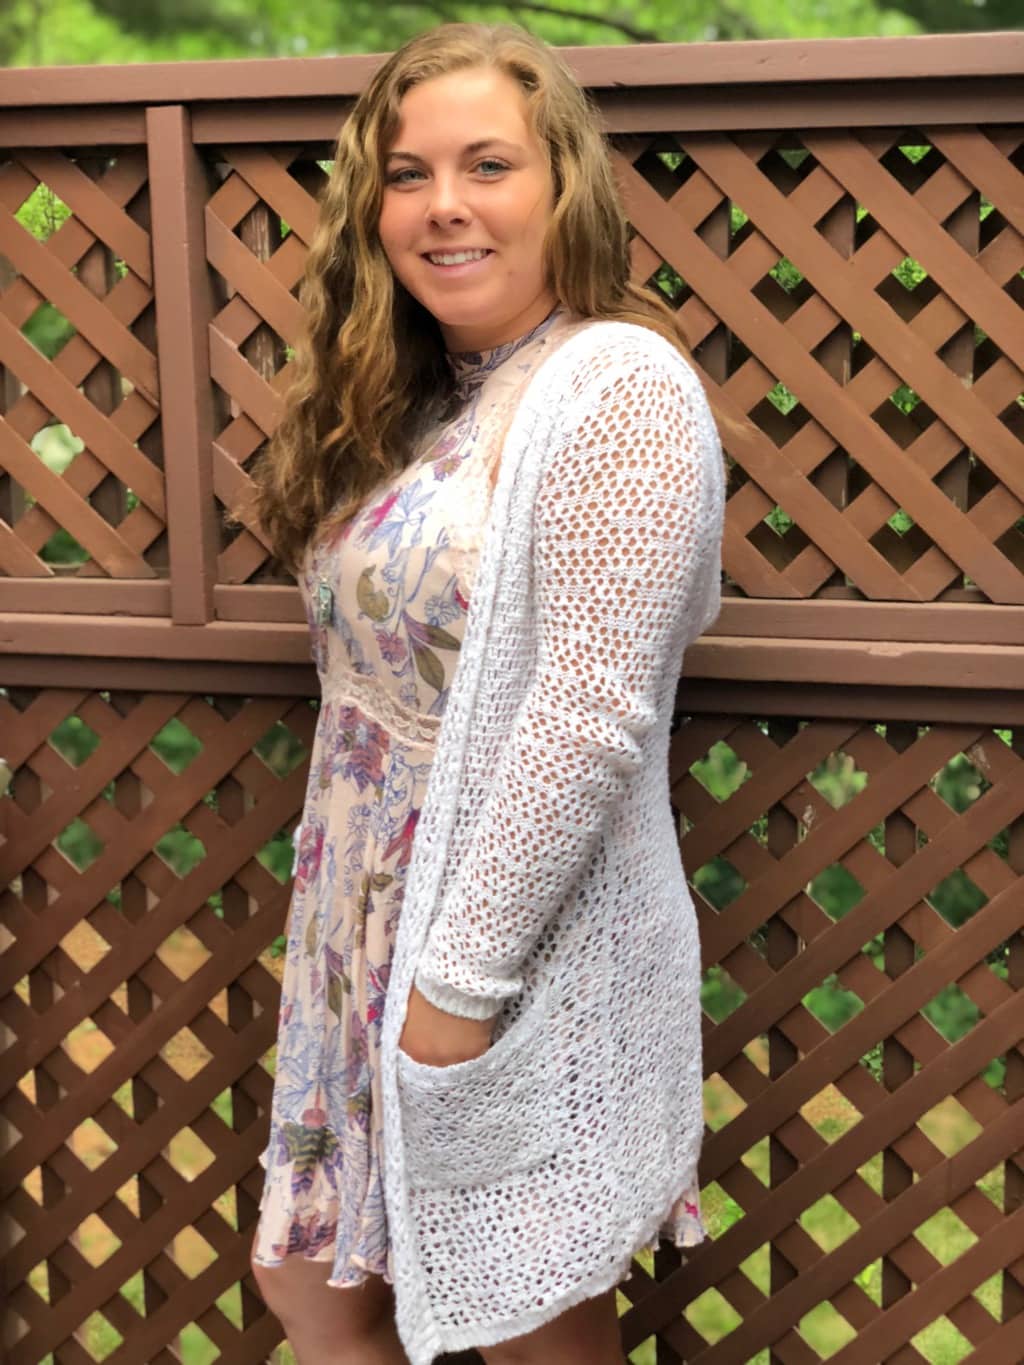 Hannah wears her white loose open-knit cardigan with a cream floral print dress.